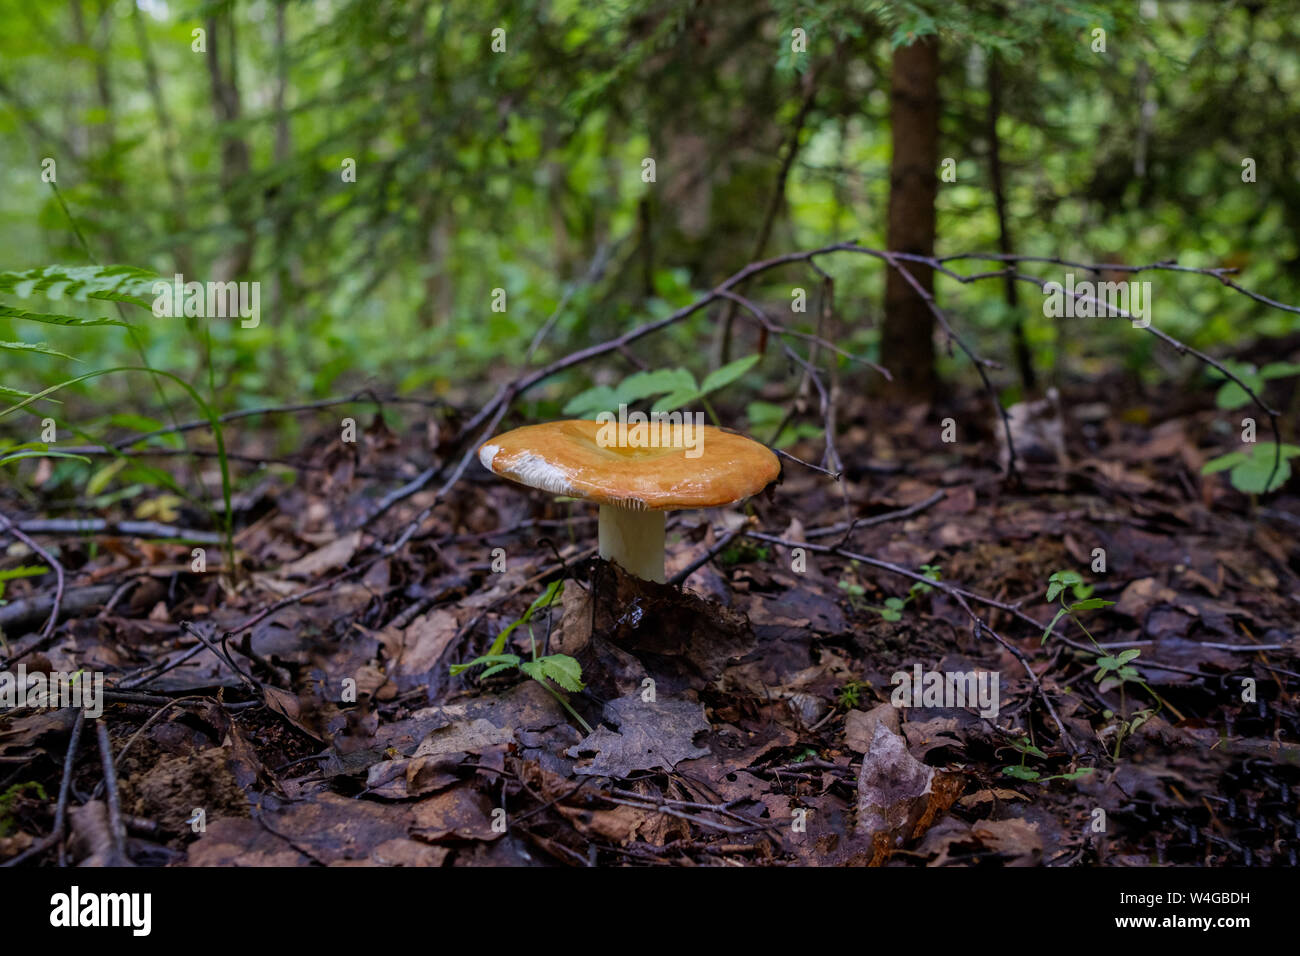 Colorful mushroom of Russula in the forest in the Moscow region, Russia. Natural source of protein. The traditional ingredient of Russian cuisine. Stock Photo